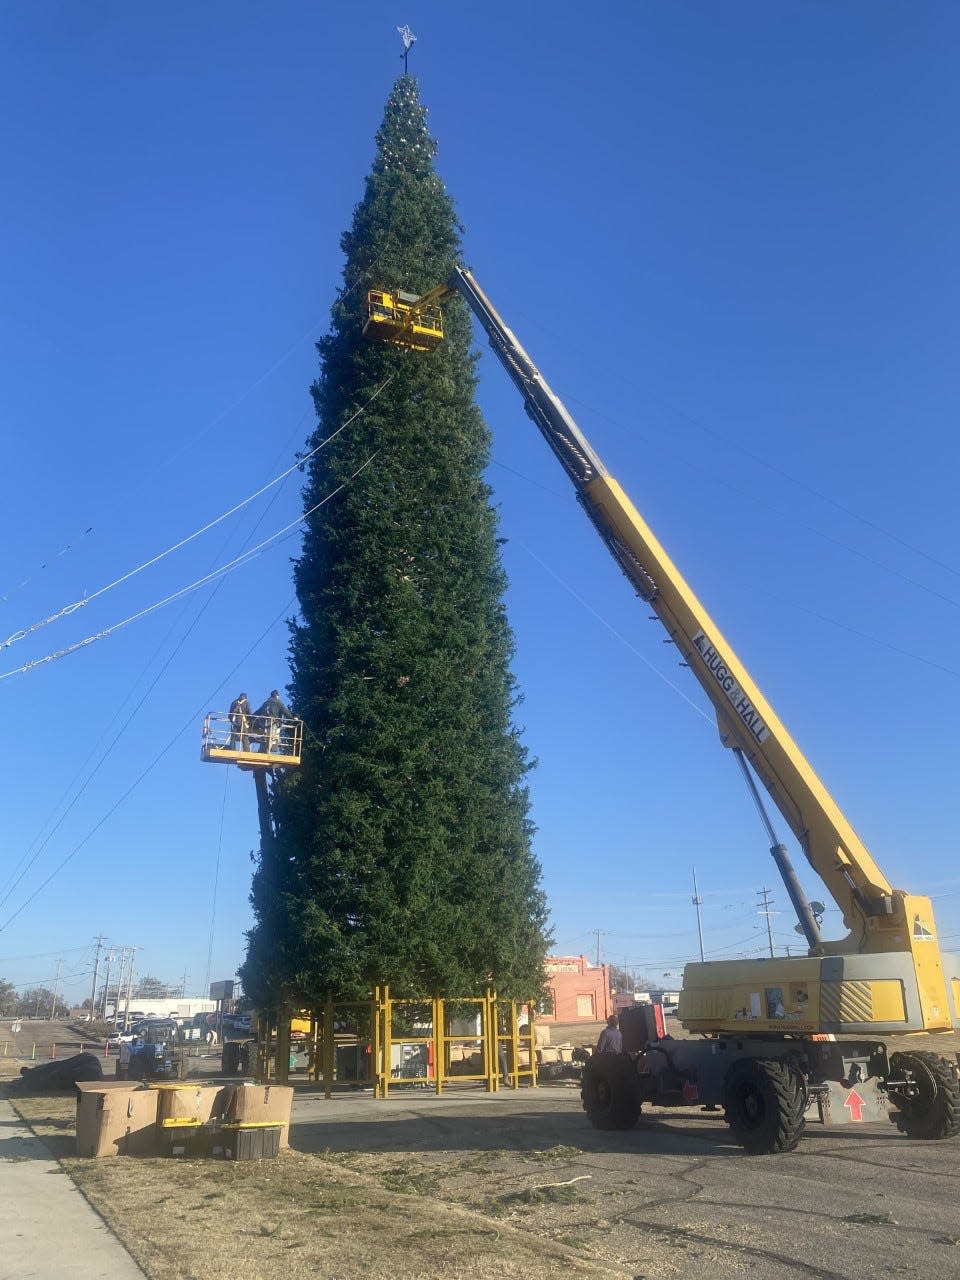 Using boom lifts, crews decorate the 140-foot-tall "world's largest fresh-cut Christmas tree" in downtown Enid.